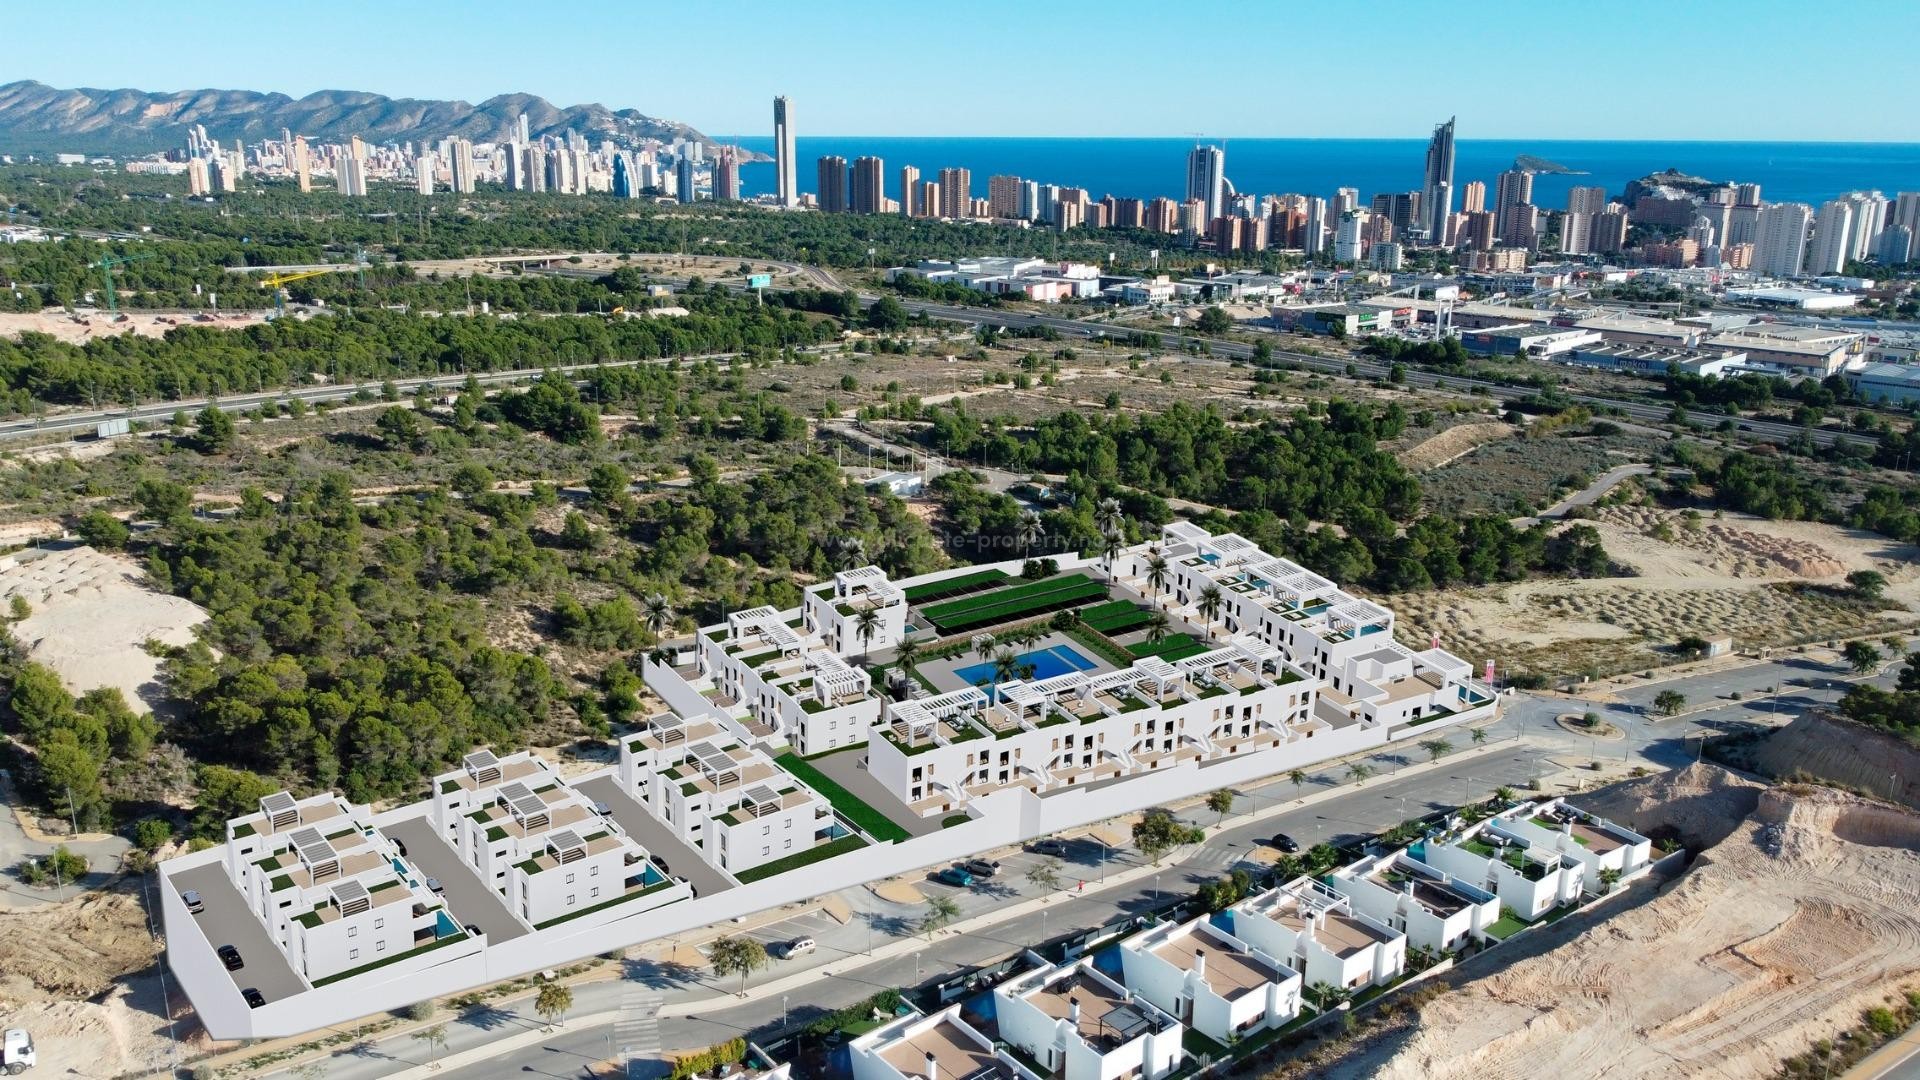 Residential complex of bungalows in Finestrat, 2/3 bedrooms and 2 bathrooms, pool, some of the units have magnificent views of the sea and Benidorm skyline